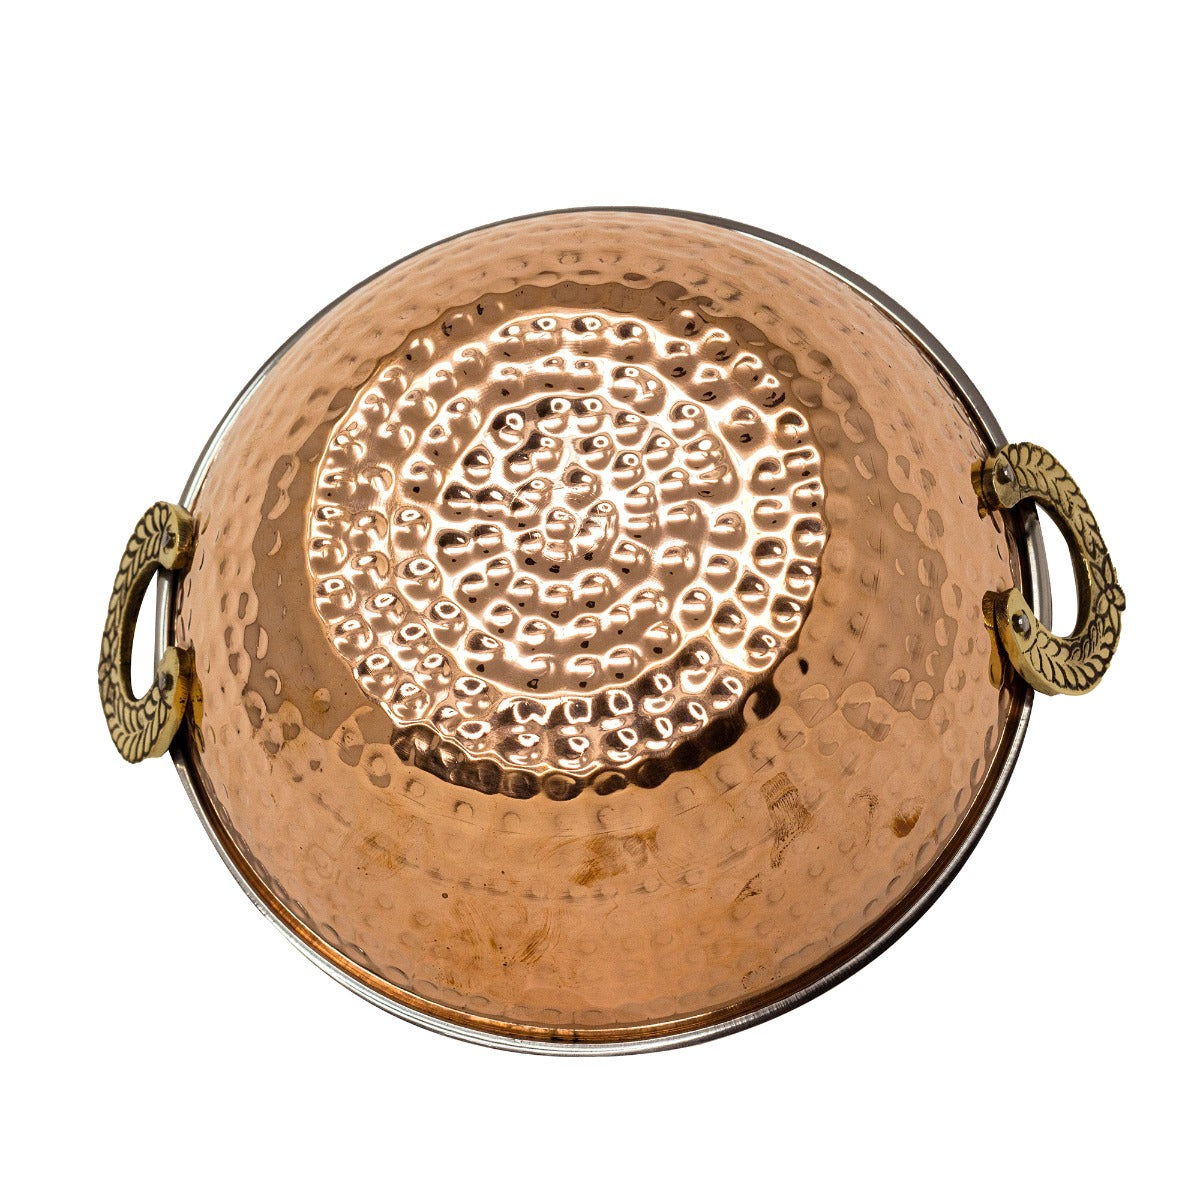 ROCK TAWA COPPER HAMMERED KADHAI WITH STAINLESS STEEL INSIDE 8" INCHES